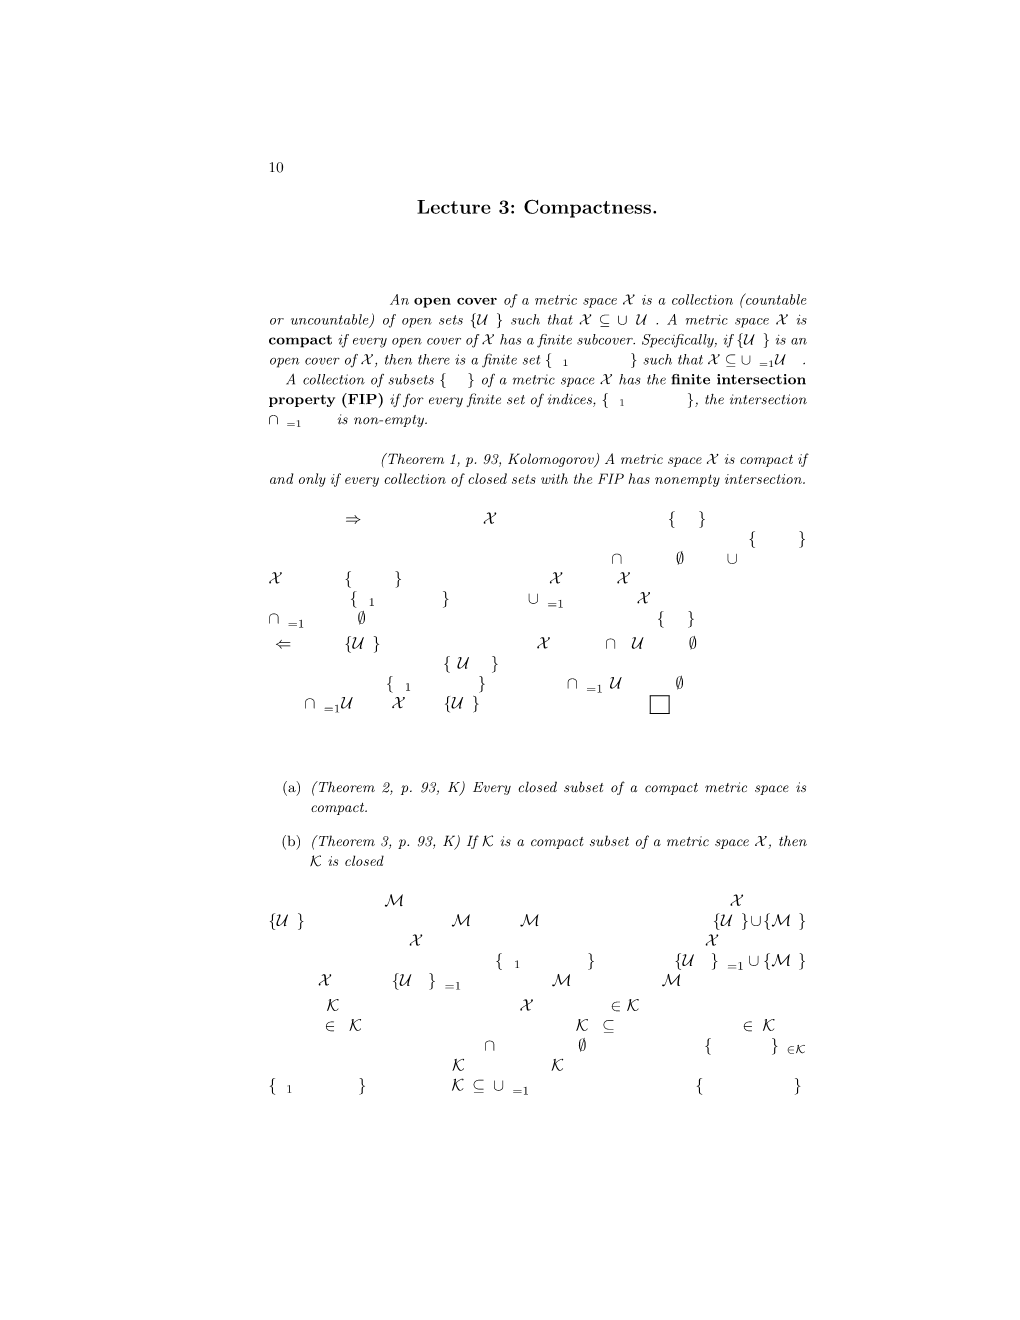 Lecture 3: Compactness